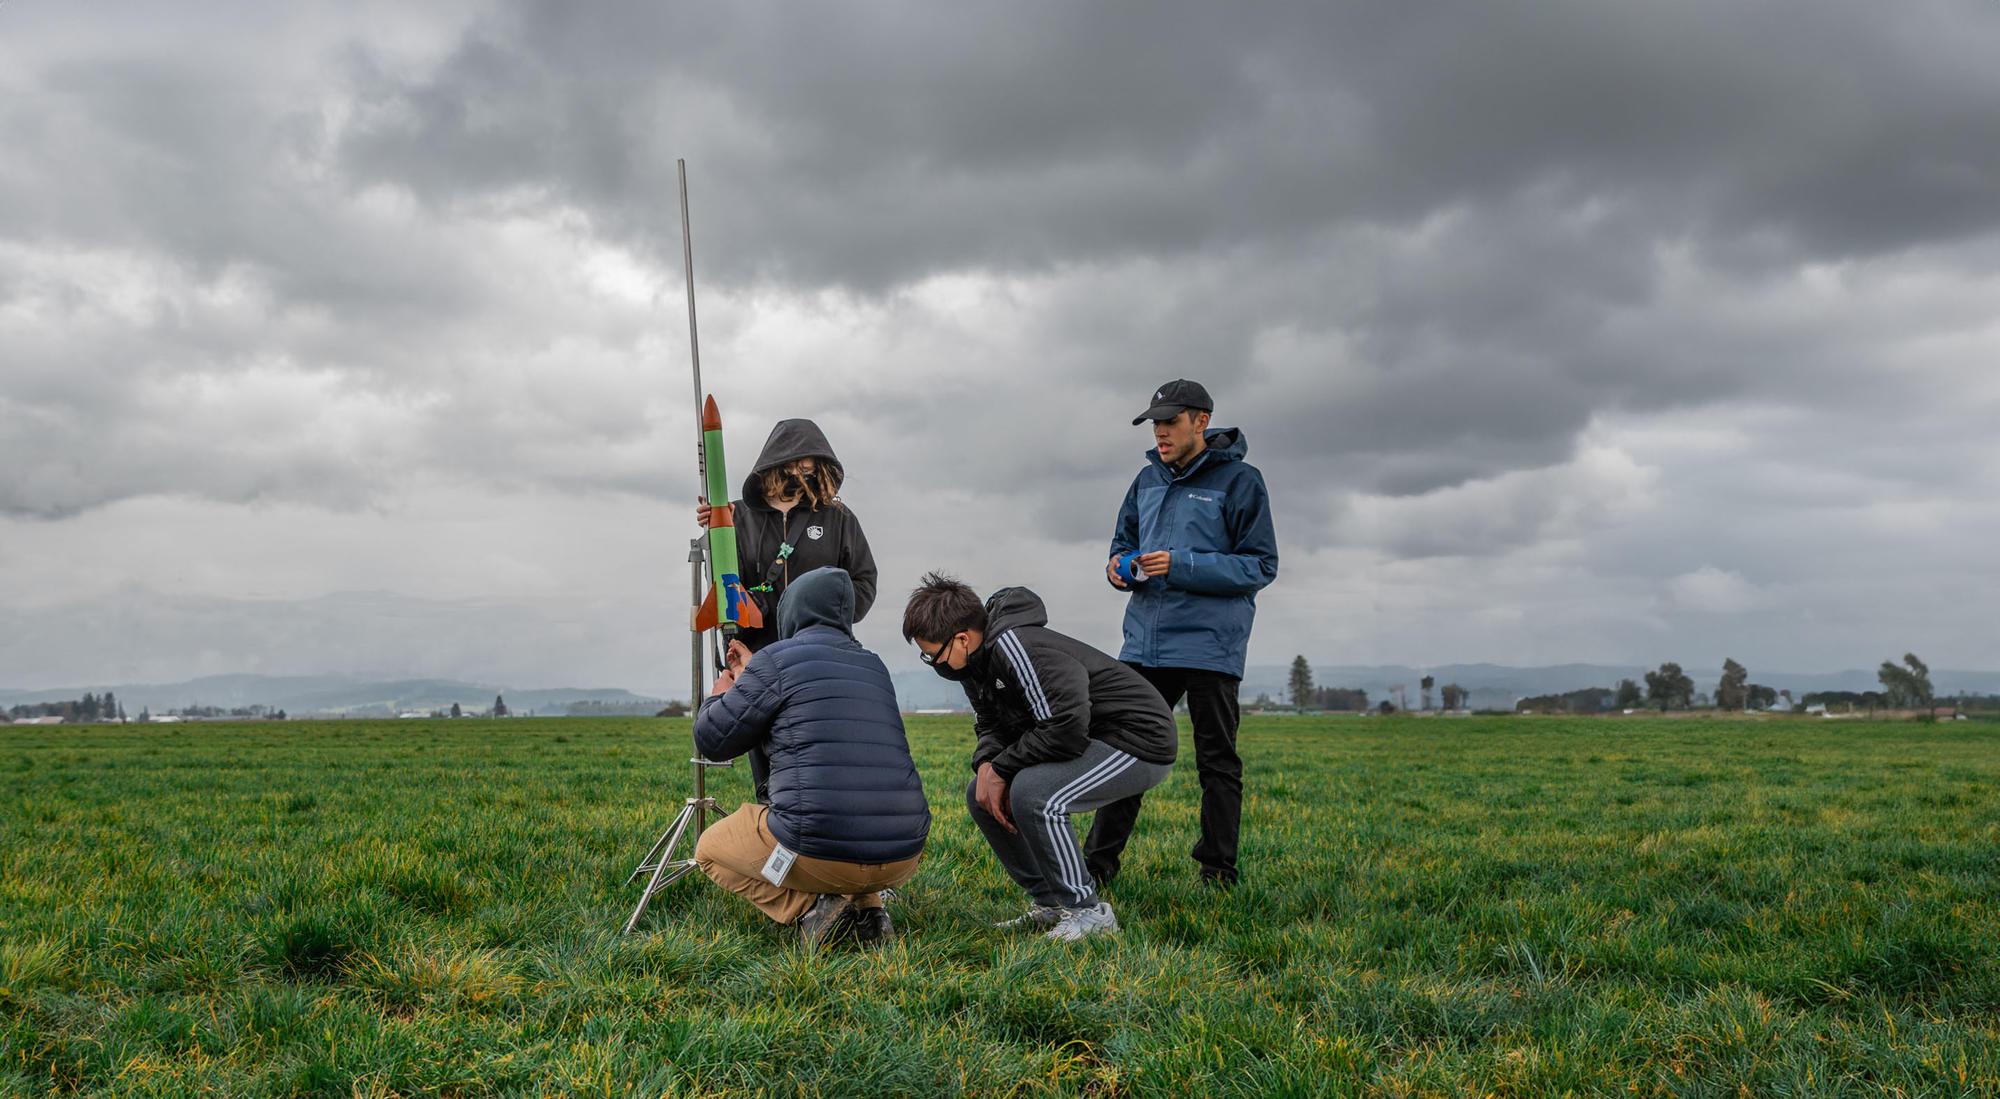 Members of the Douglas County rocketry club prepare for a launch